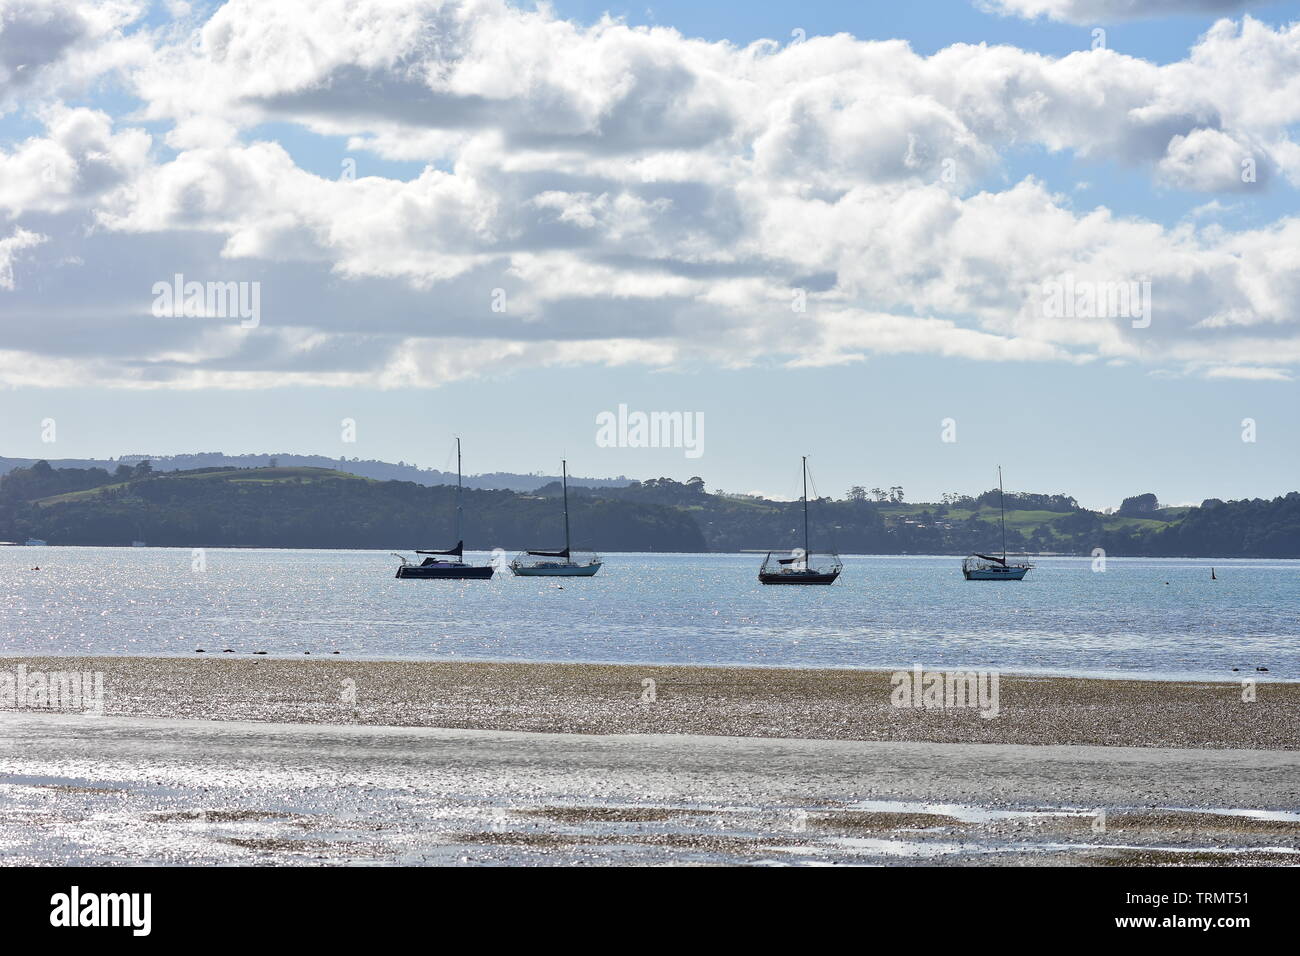 Shallow bay at low tide with sail boats on moorings and mud flats in foreground. Stock Photo